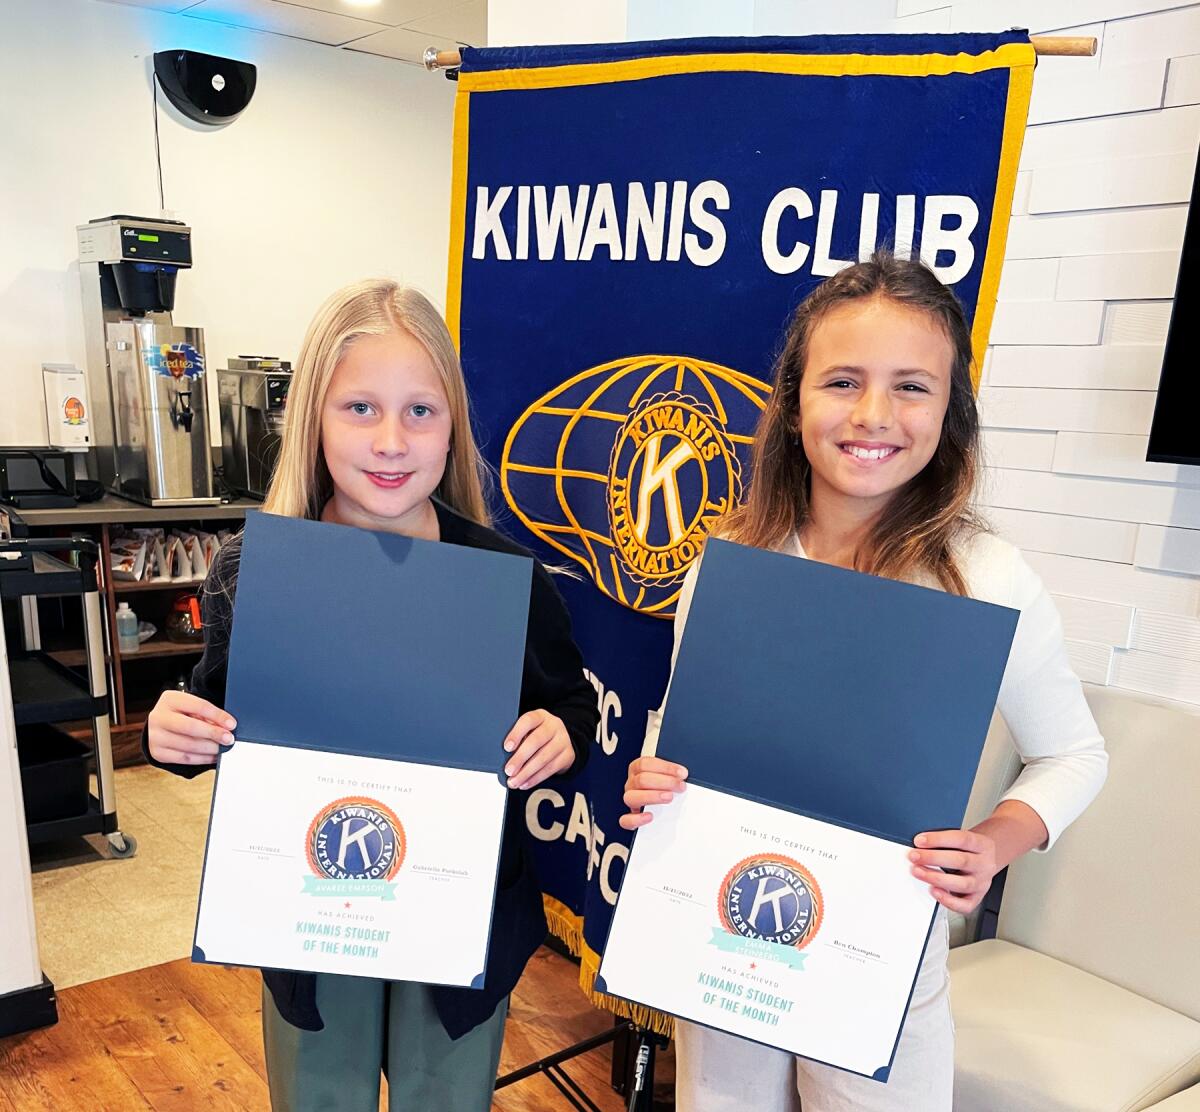 Receiving the Pacific Beach Kiwanis Club’s November 2022 “Student of the Month” honor were Averree Empson and Emma Steinberg.